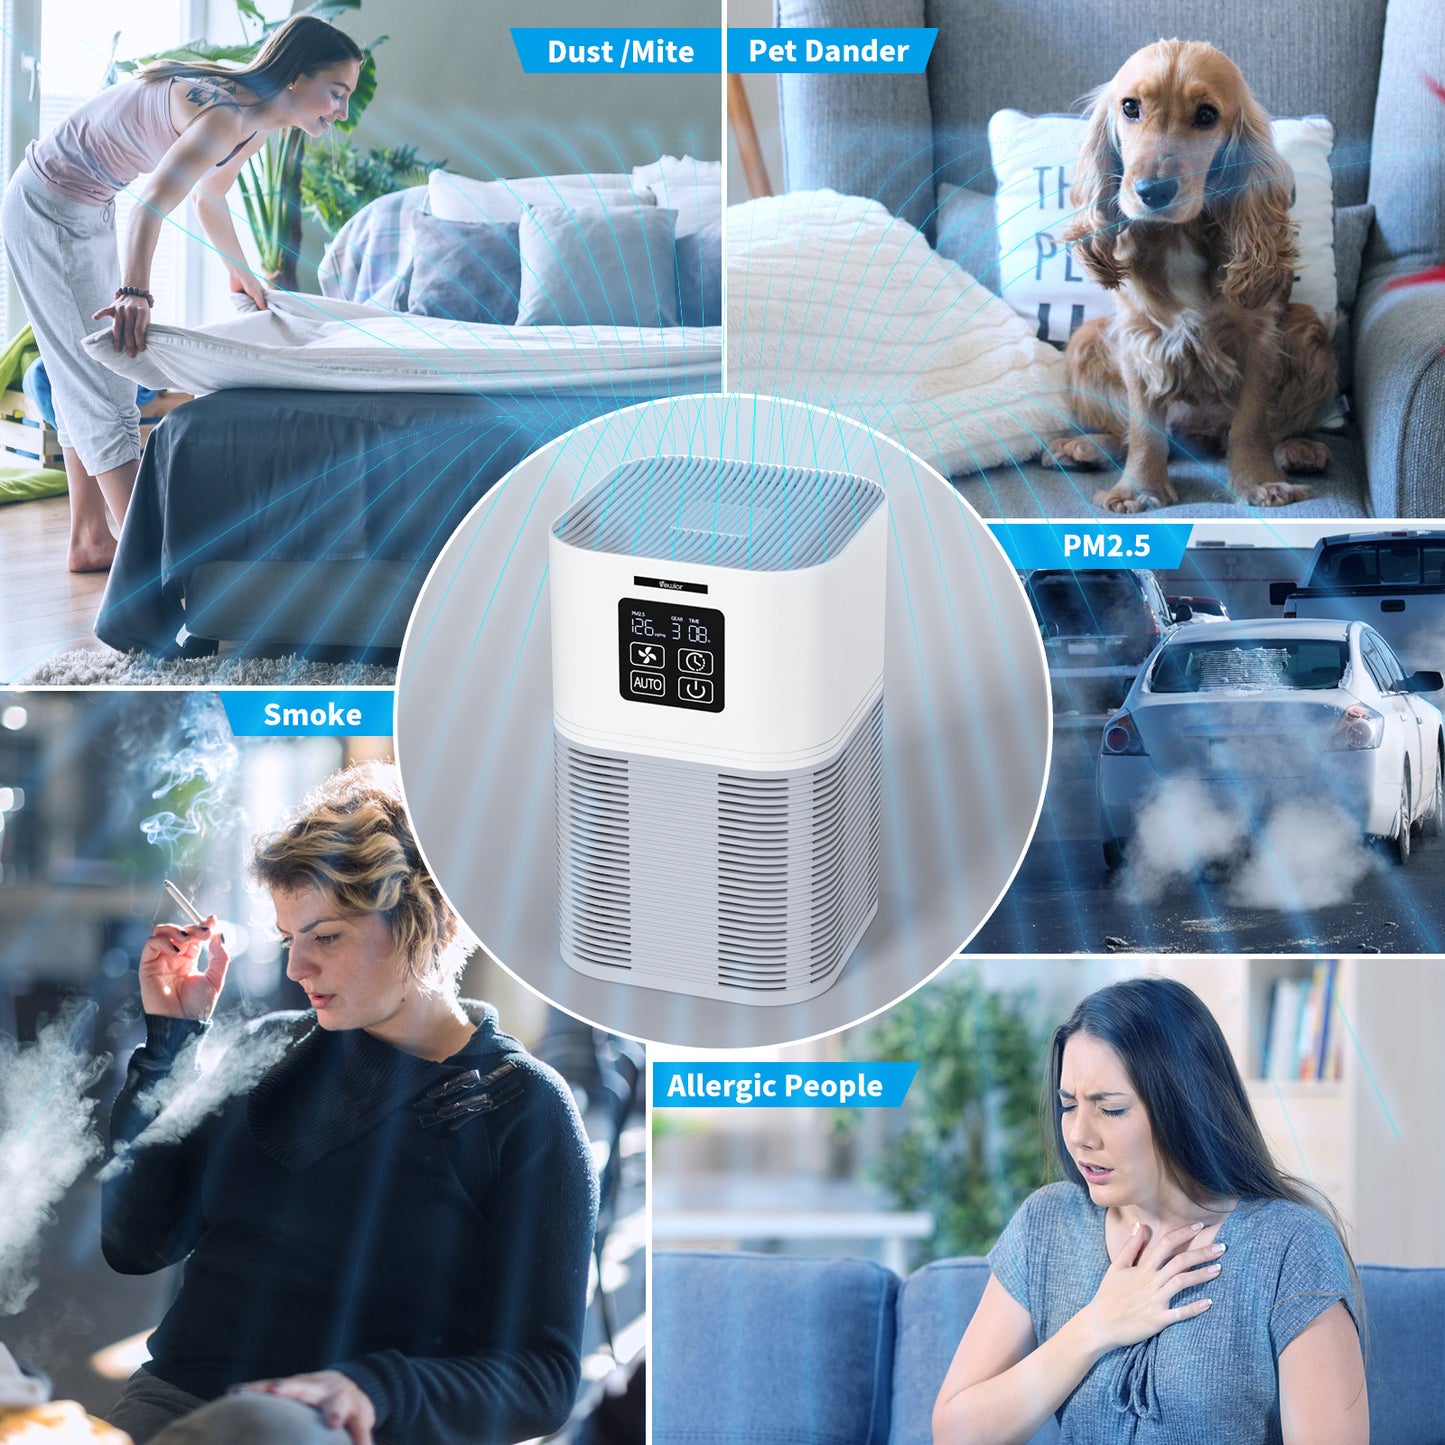 (Do Not Sell on Amazon) VEWIOR 2 in 1 Air Purifier with H13 Filters for Home Allergies Pets Hair Odor Eliminators, Aromatherapy diffuser and Auto Mode, Quiet Air Cleaner for Office, Home, Bedroom